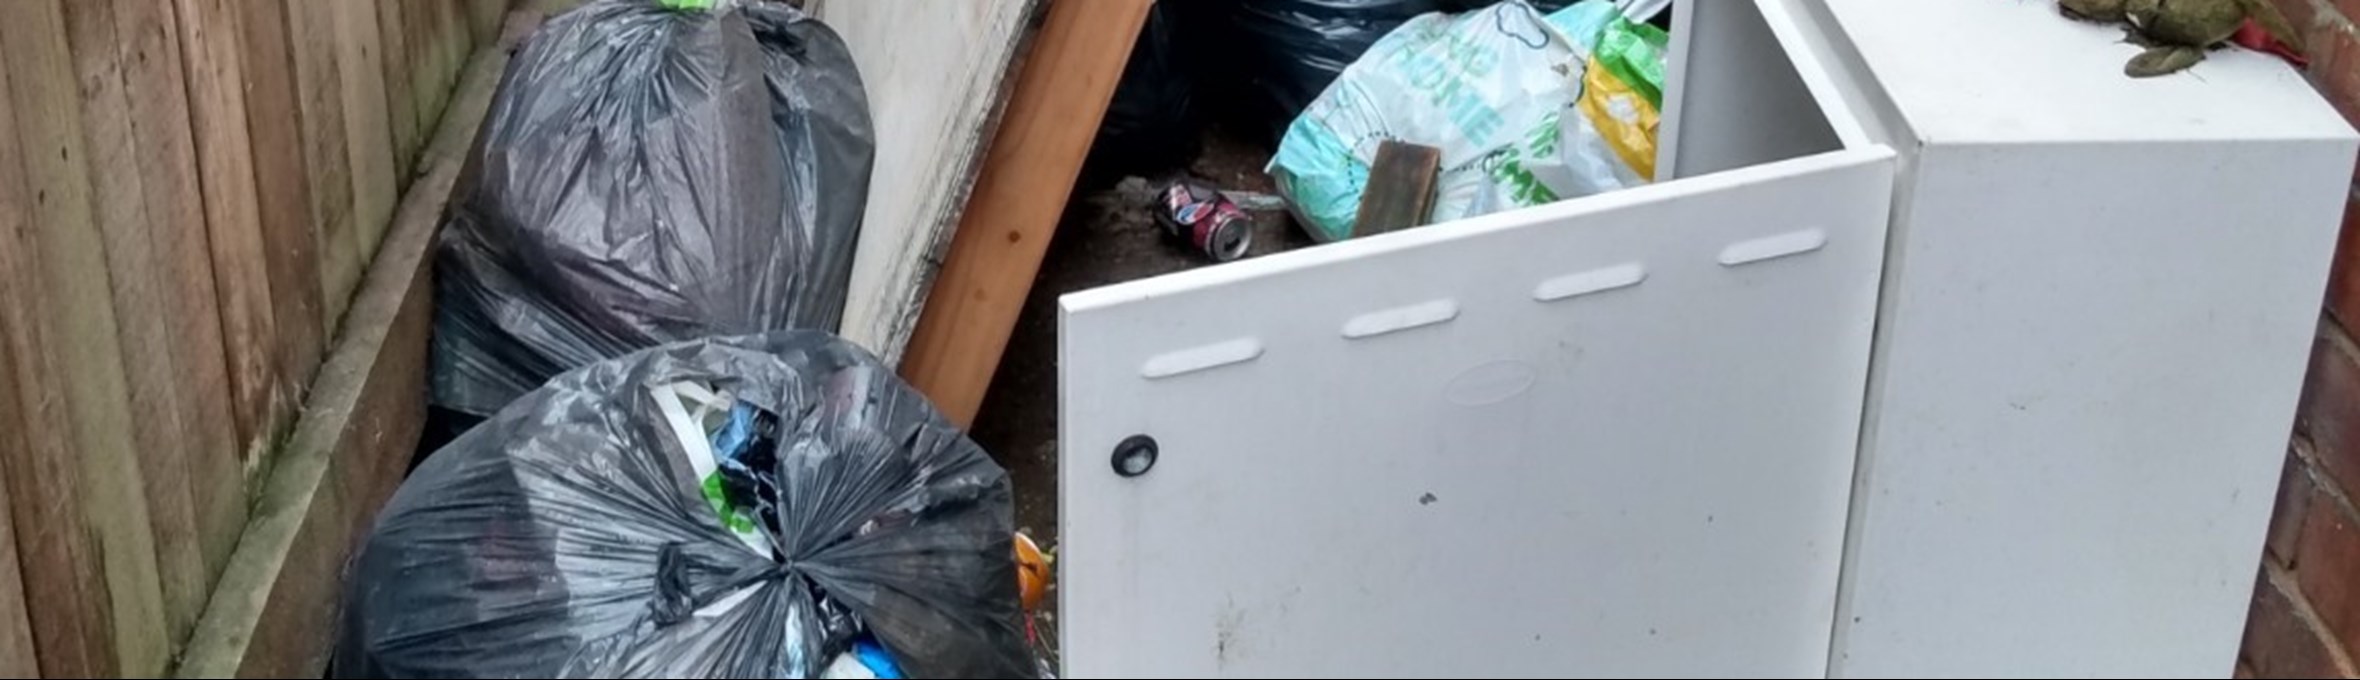 waste at property